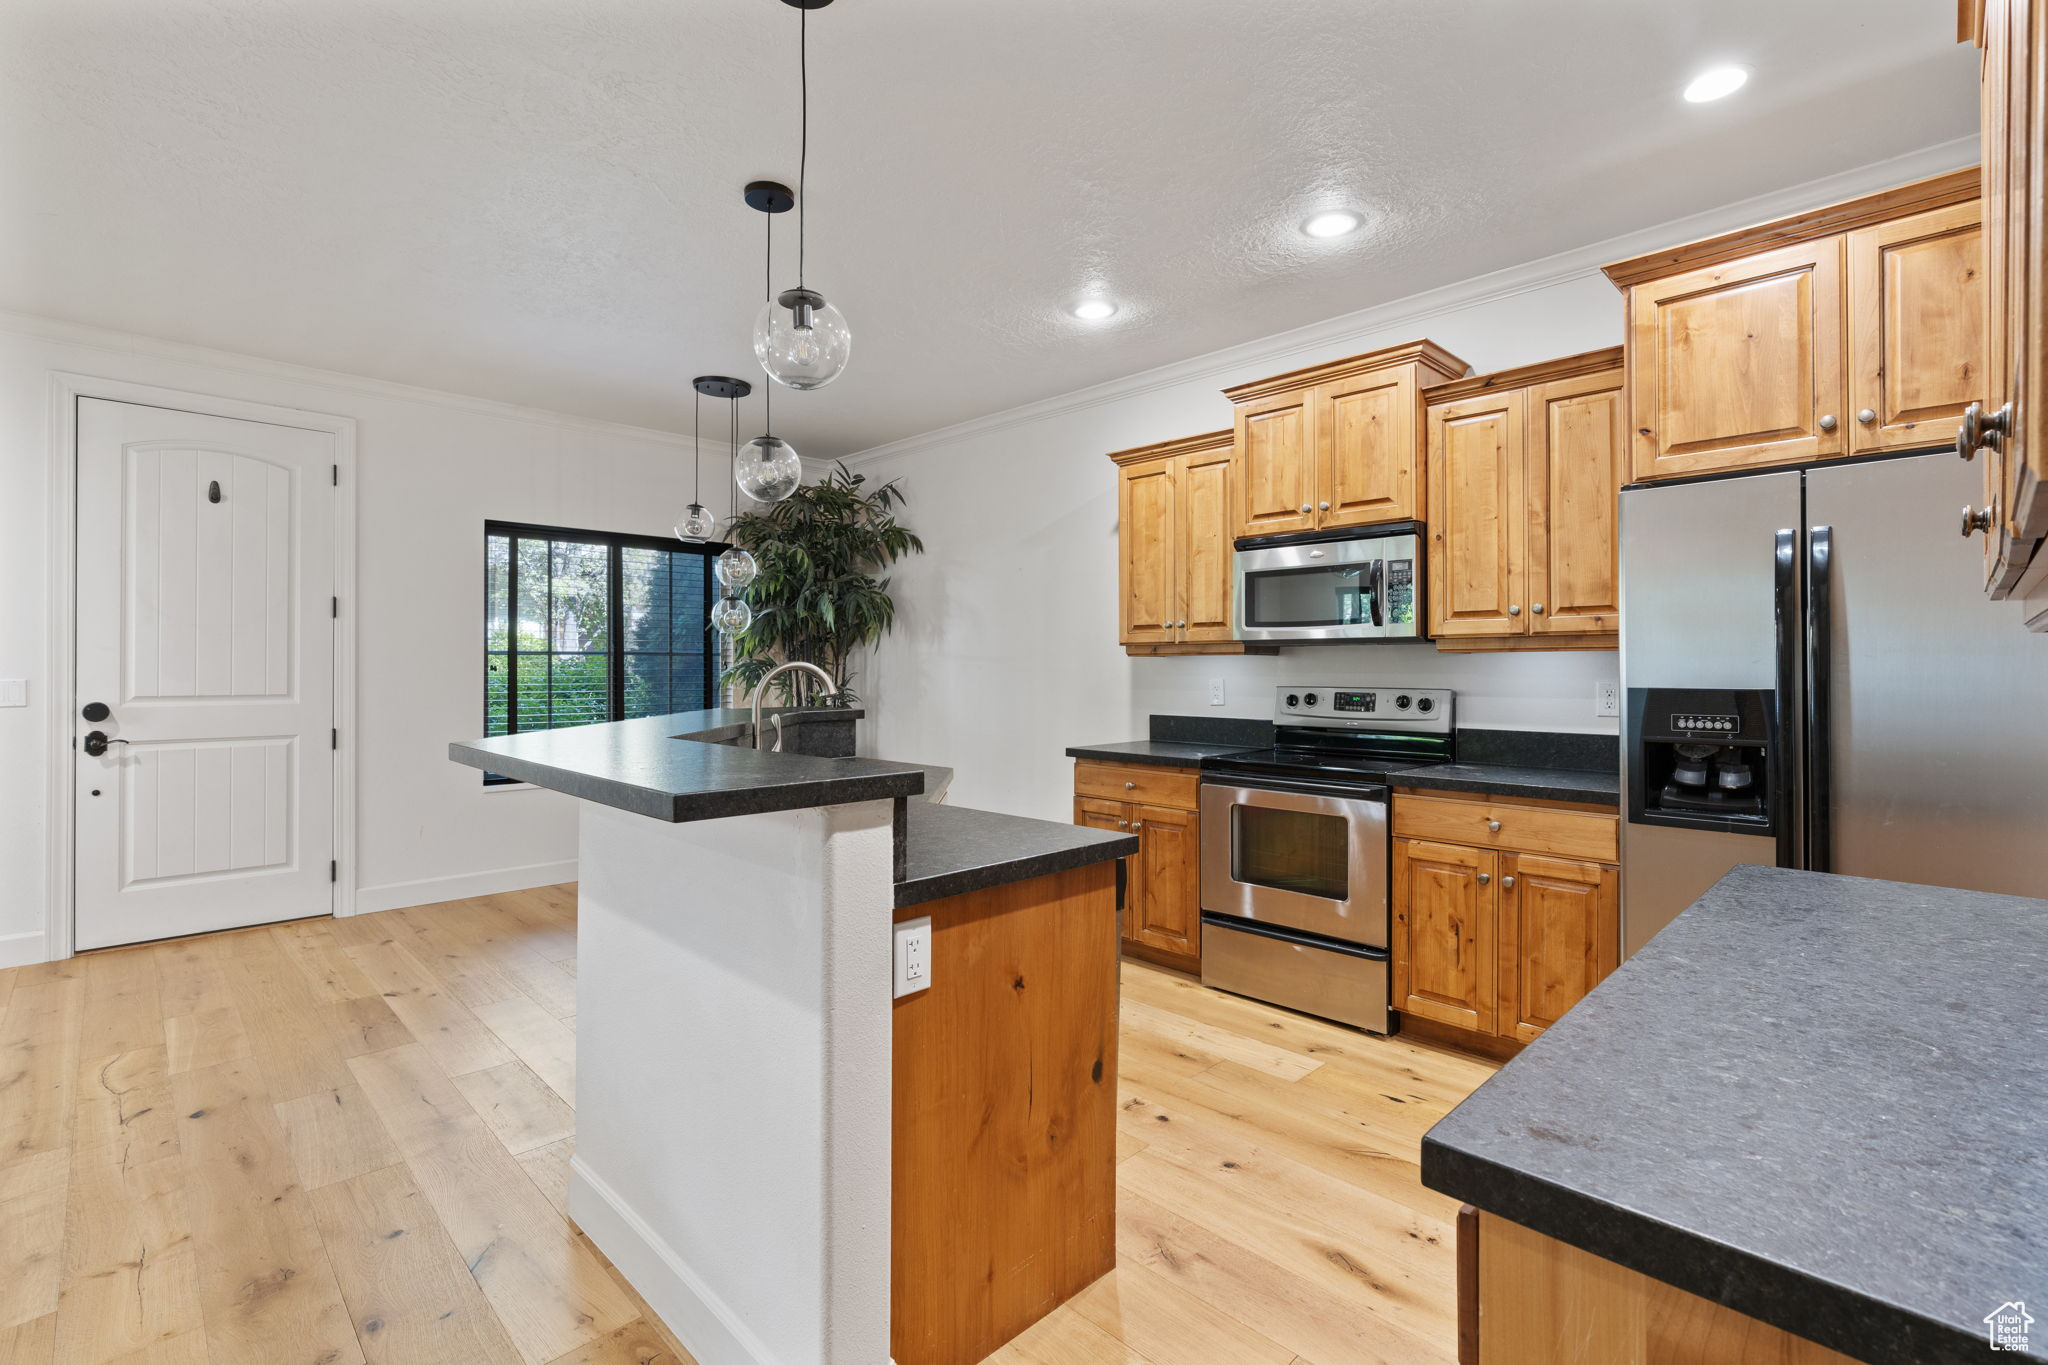 Kitchen featuring decorative light fixtures, light hardwood / wood-style flooring, stainless steel appliances, a center island with sink, and ornamental molding